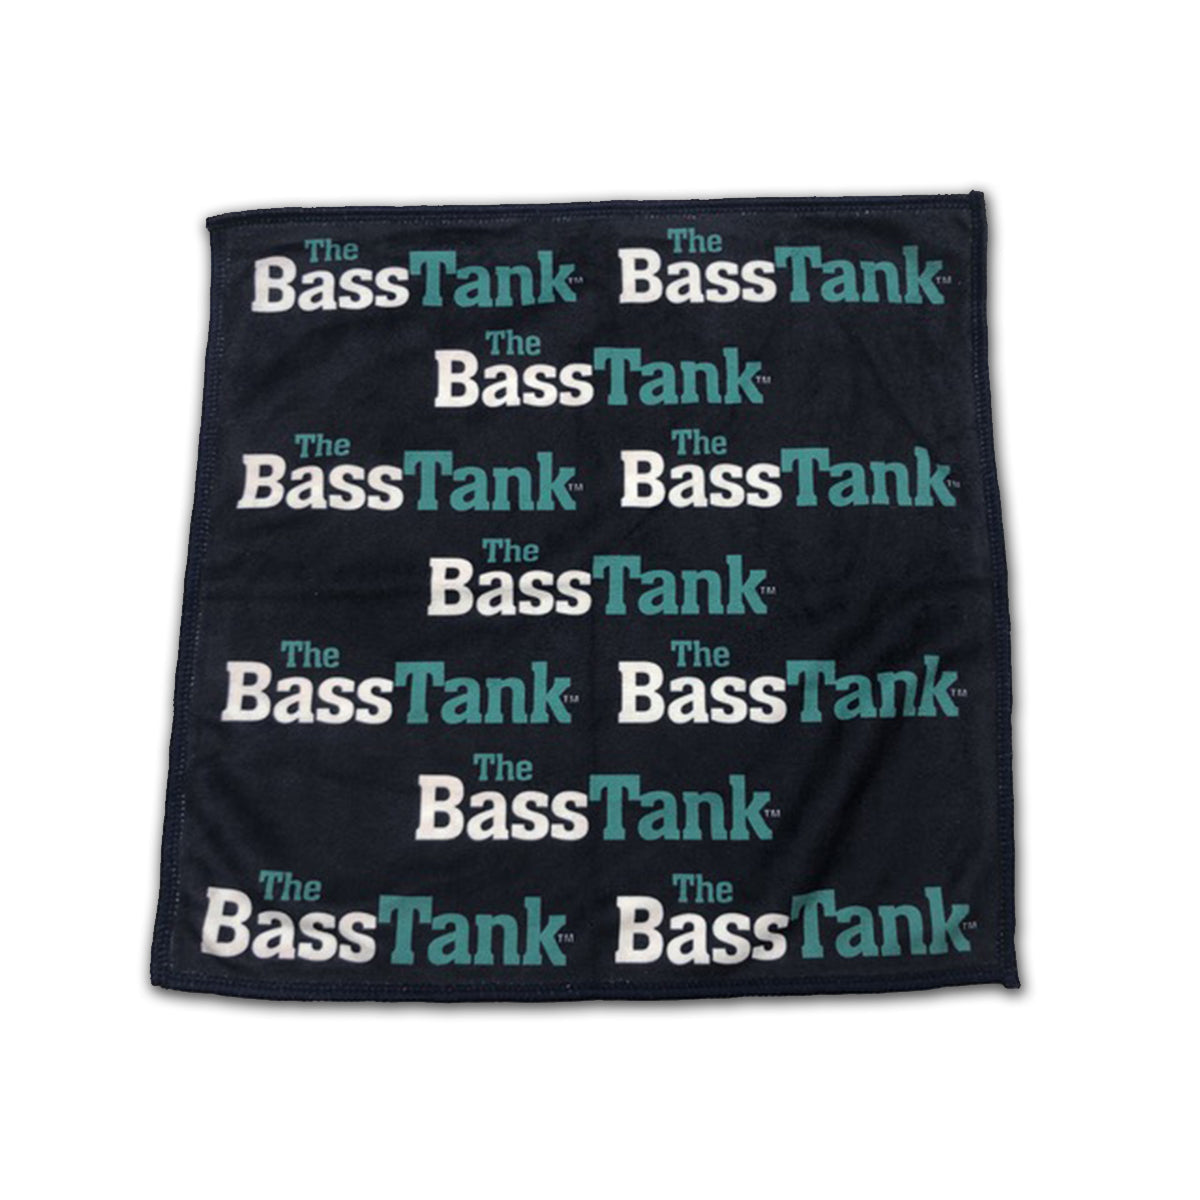 The Bass Tank Screen Cleaner™